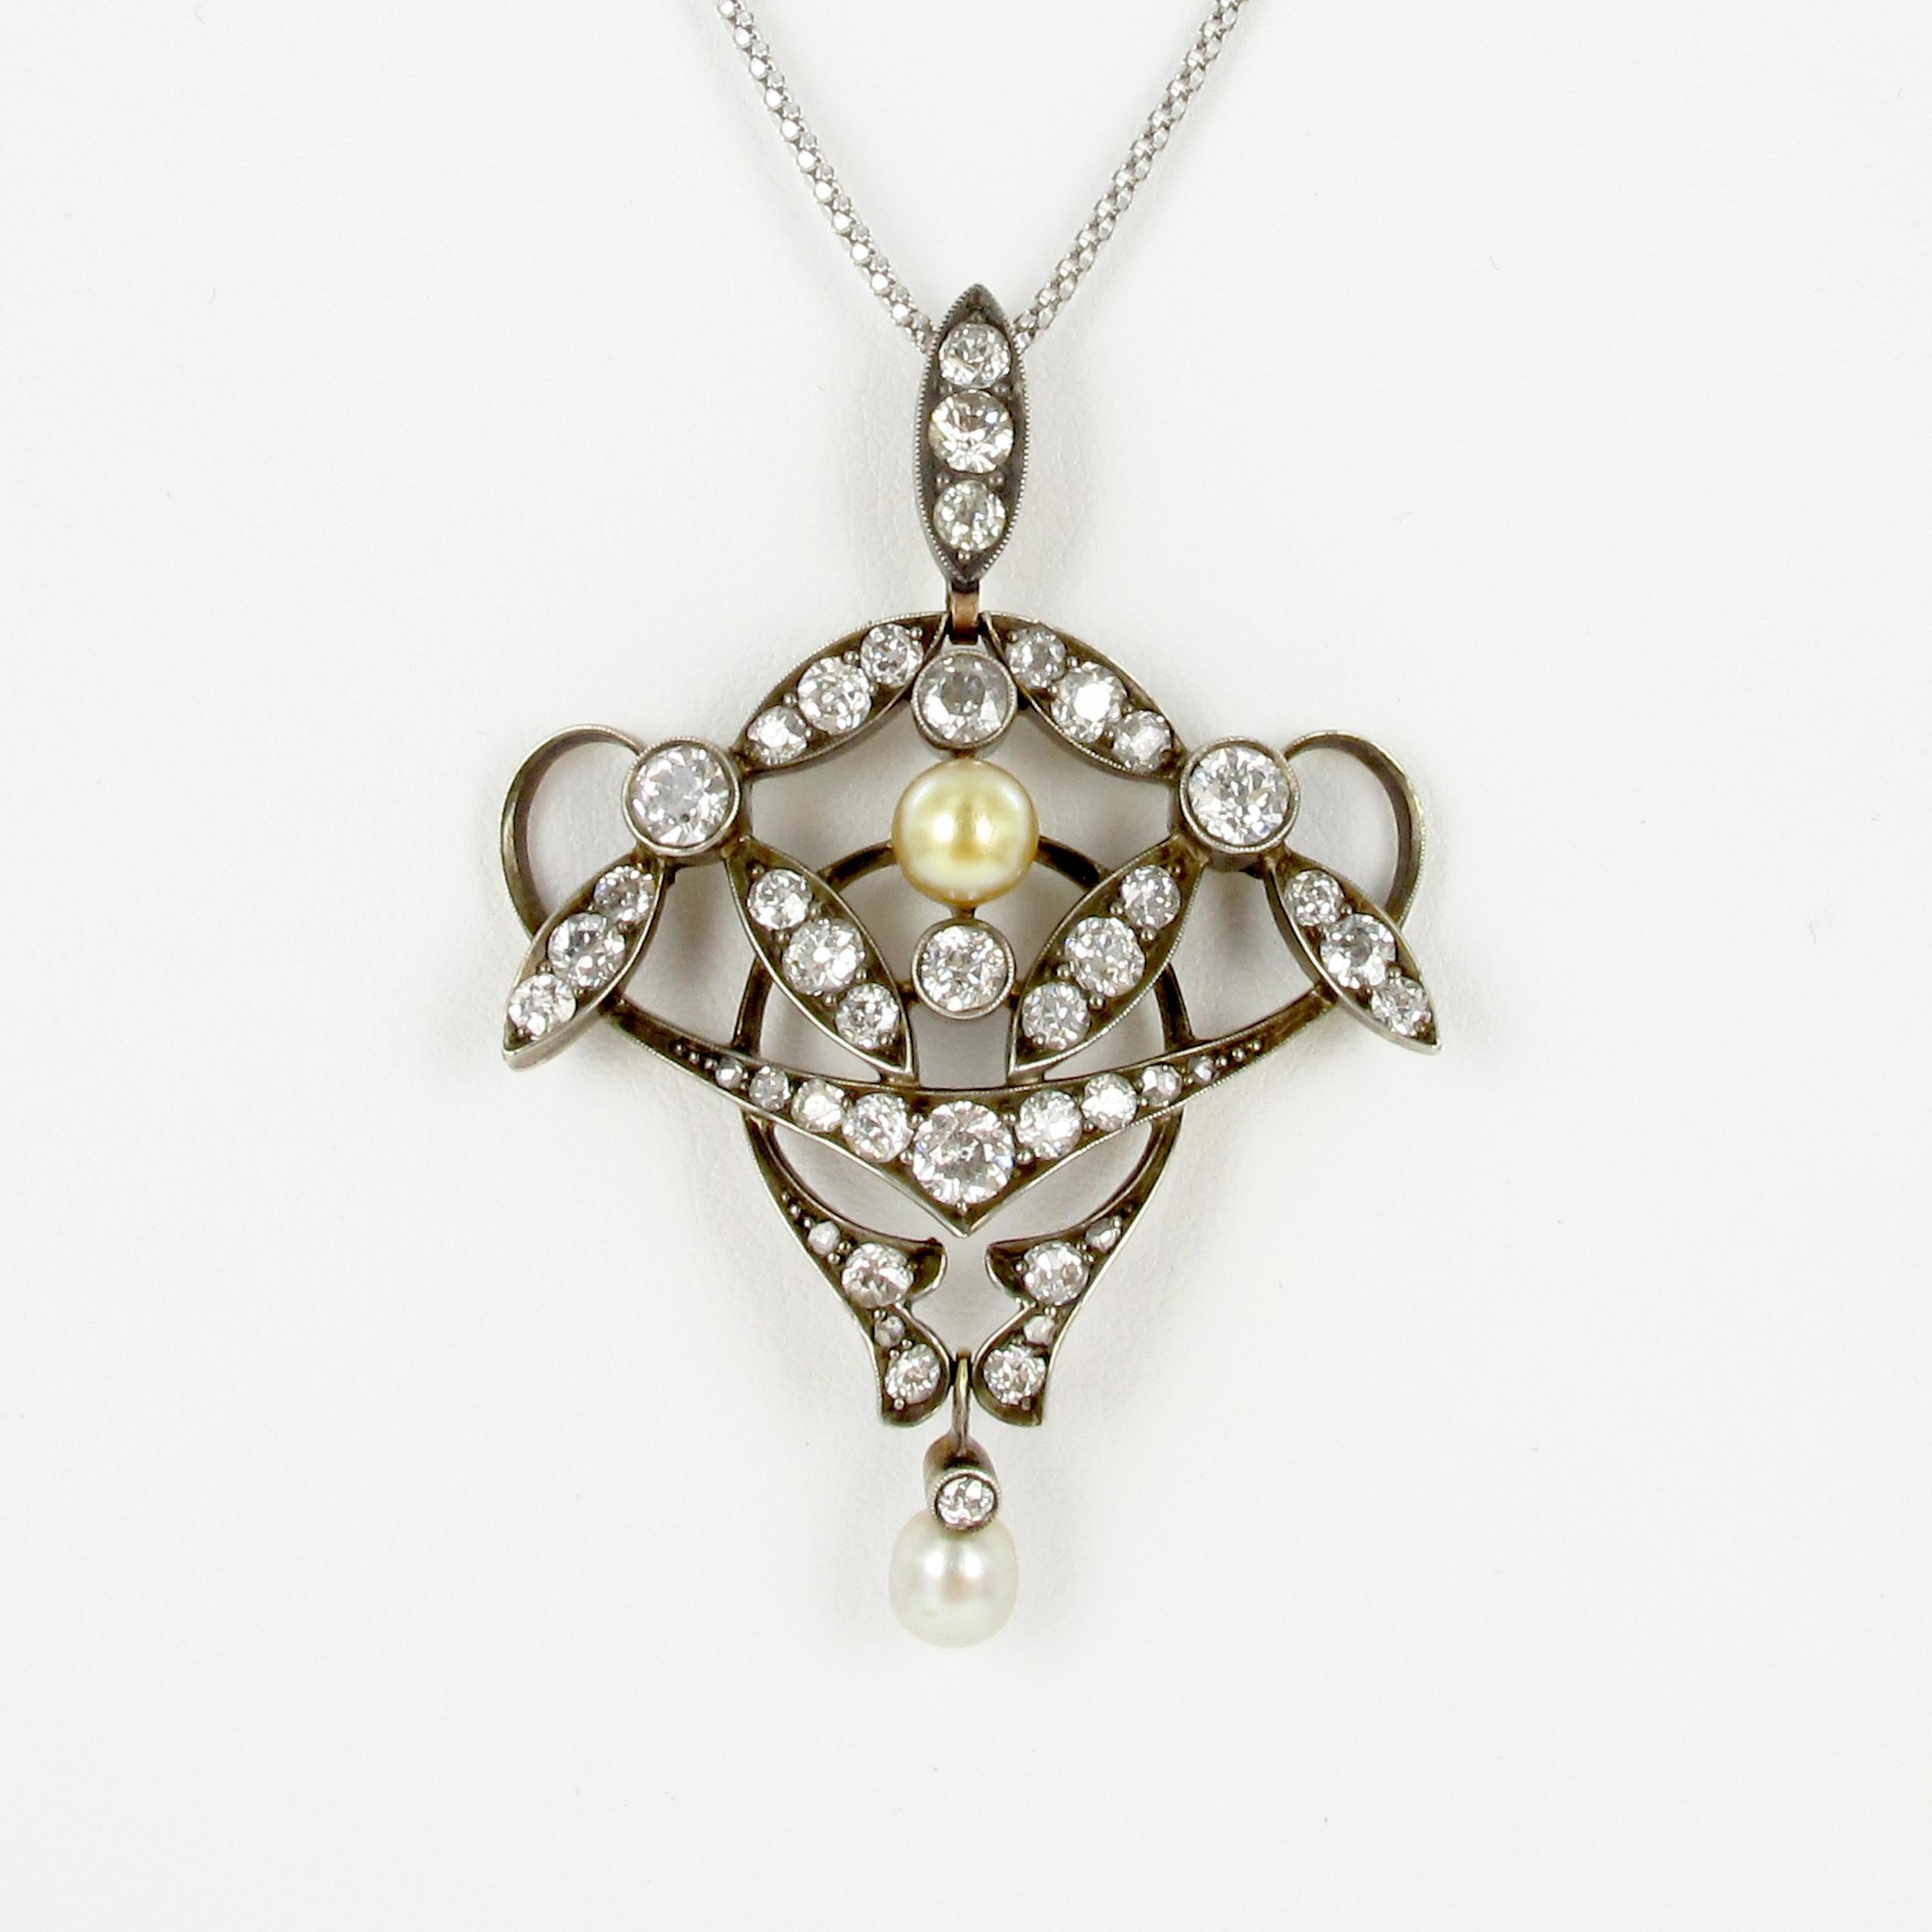 This cute Victorian pendant is held in silver on gold 750 which is a typical combination for that period. The pendant is set with 39 old cut diamonds totaling approximate 3.10 carats. The diamonds are of H/I-vs/si quality. The pendant is further